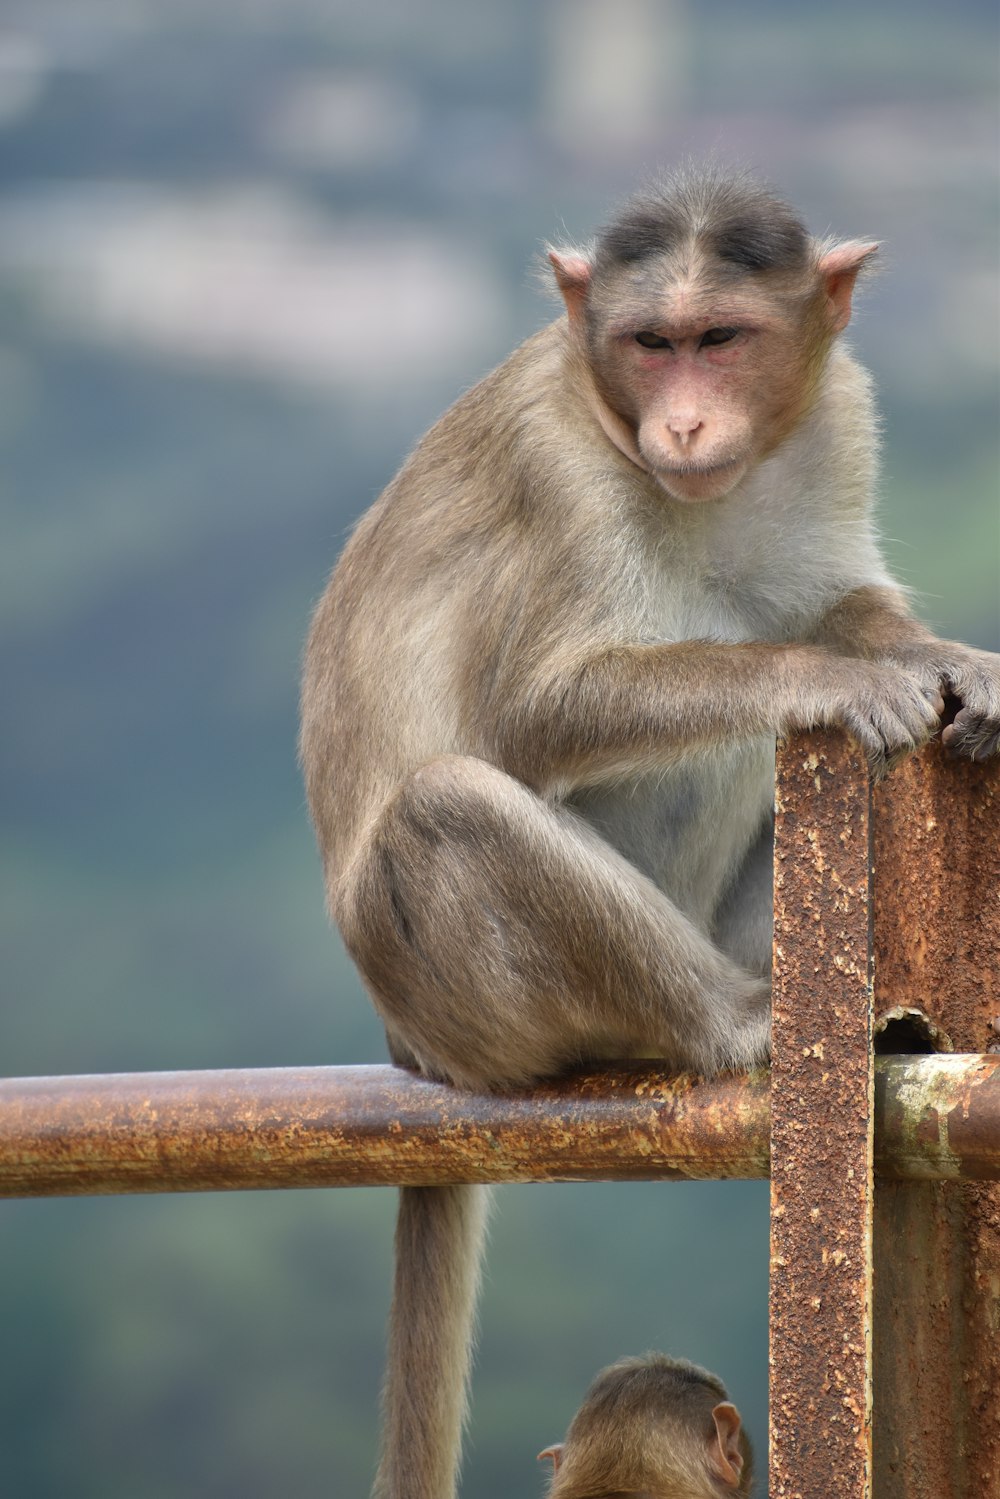 selective focus photography of monkey sits on metal rail